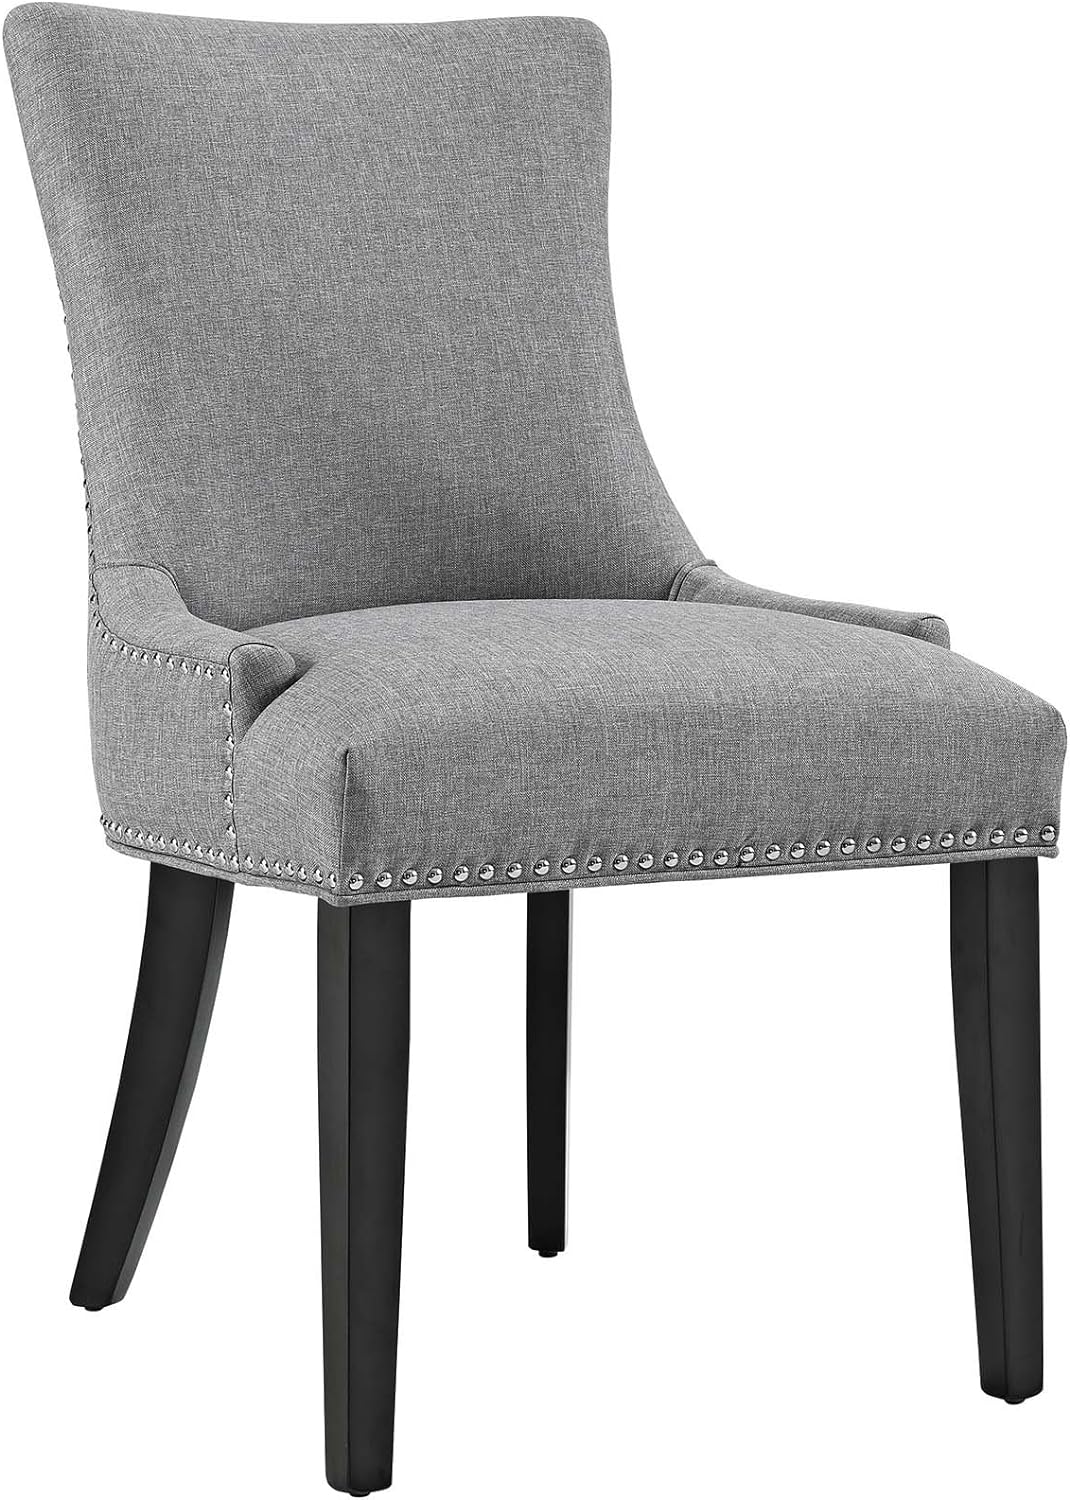 Modway Marquis Modern Gray Upholstered Fabric Dining Chair with Nailhead Trim